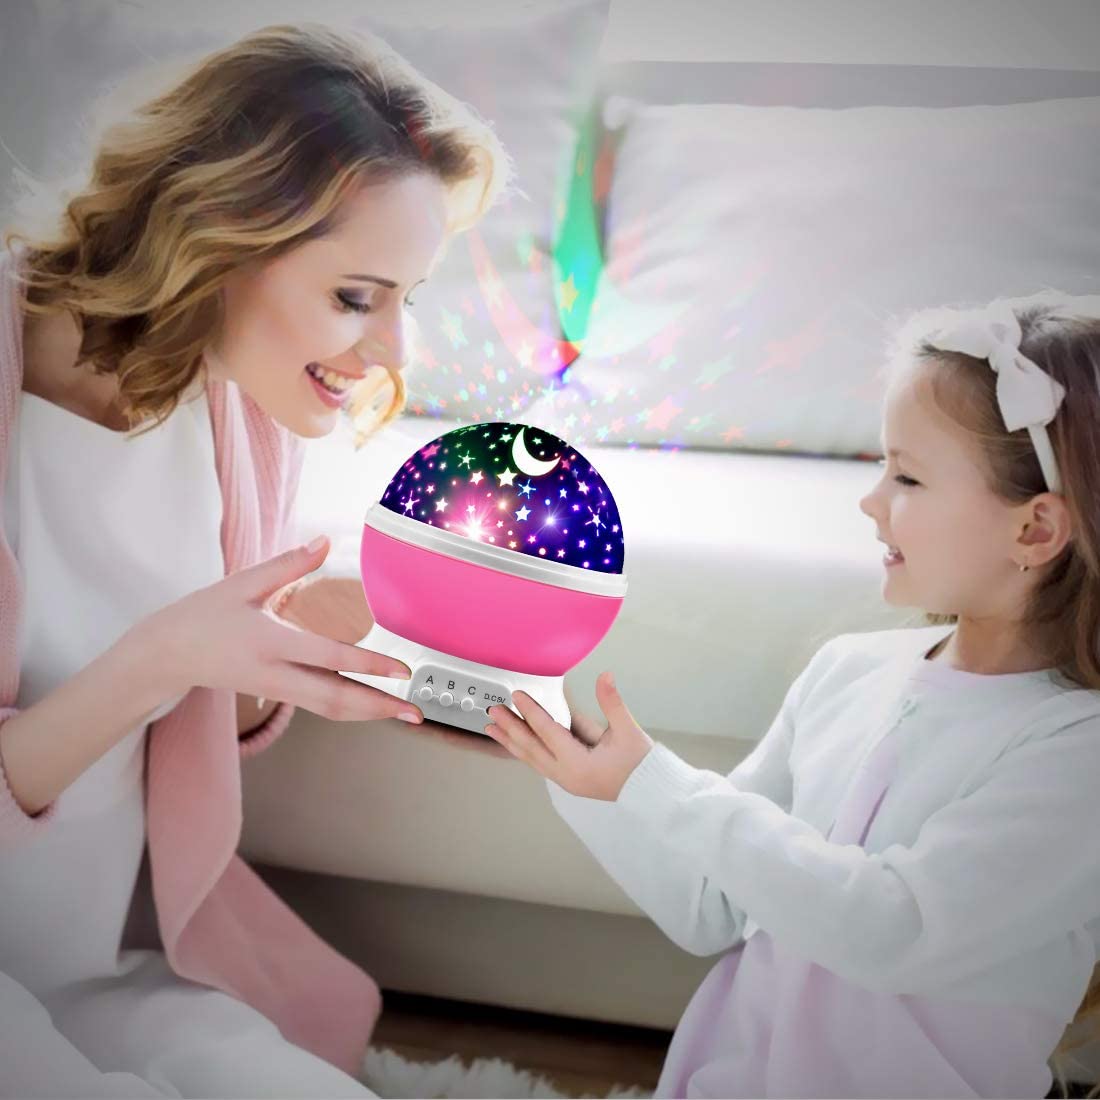 LED-Starry-Projector-Lamp-Baby-Night-Light-USB-Romantic-Rotating-Moon-Cosmos-Sky-Star-Projection-Lam-1937902-6